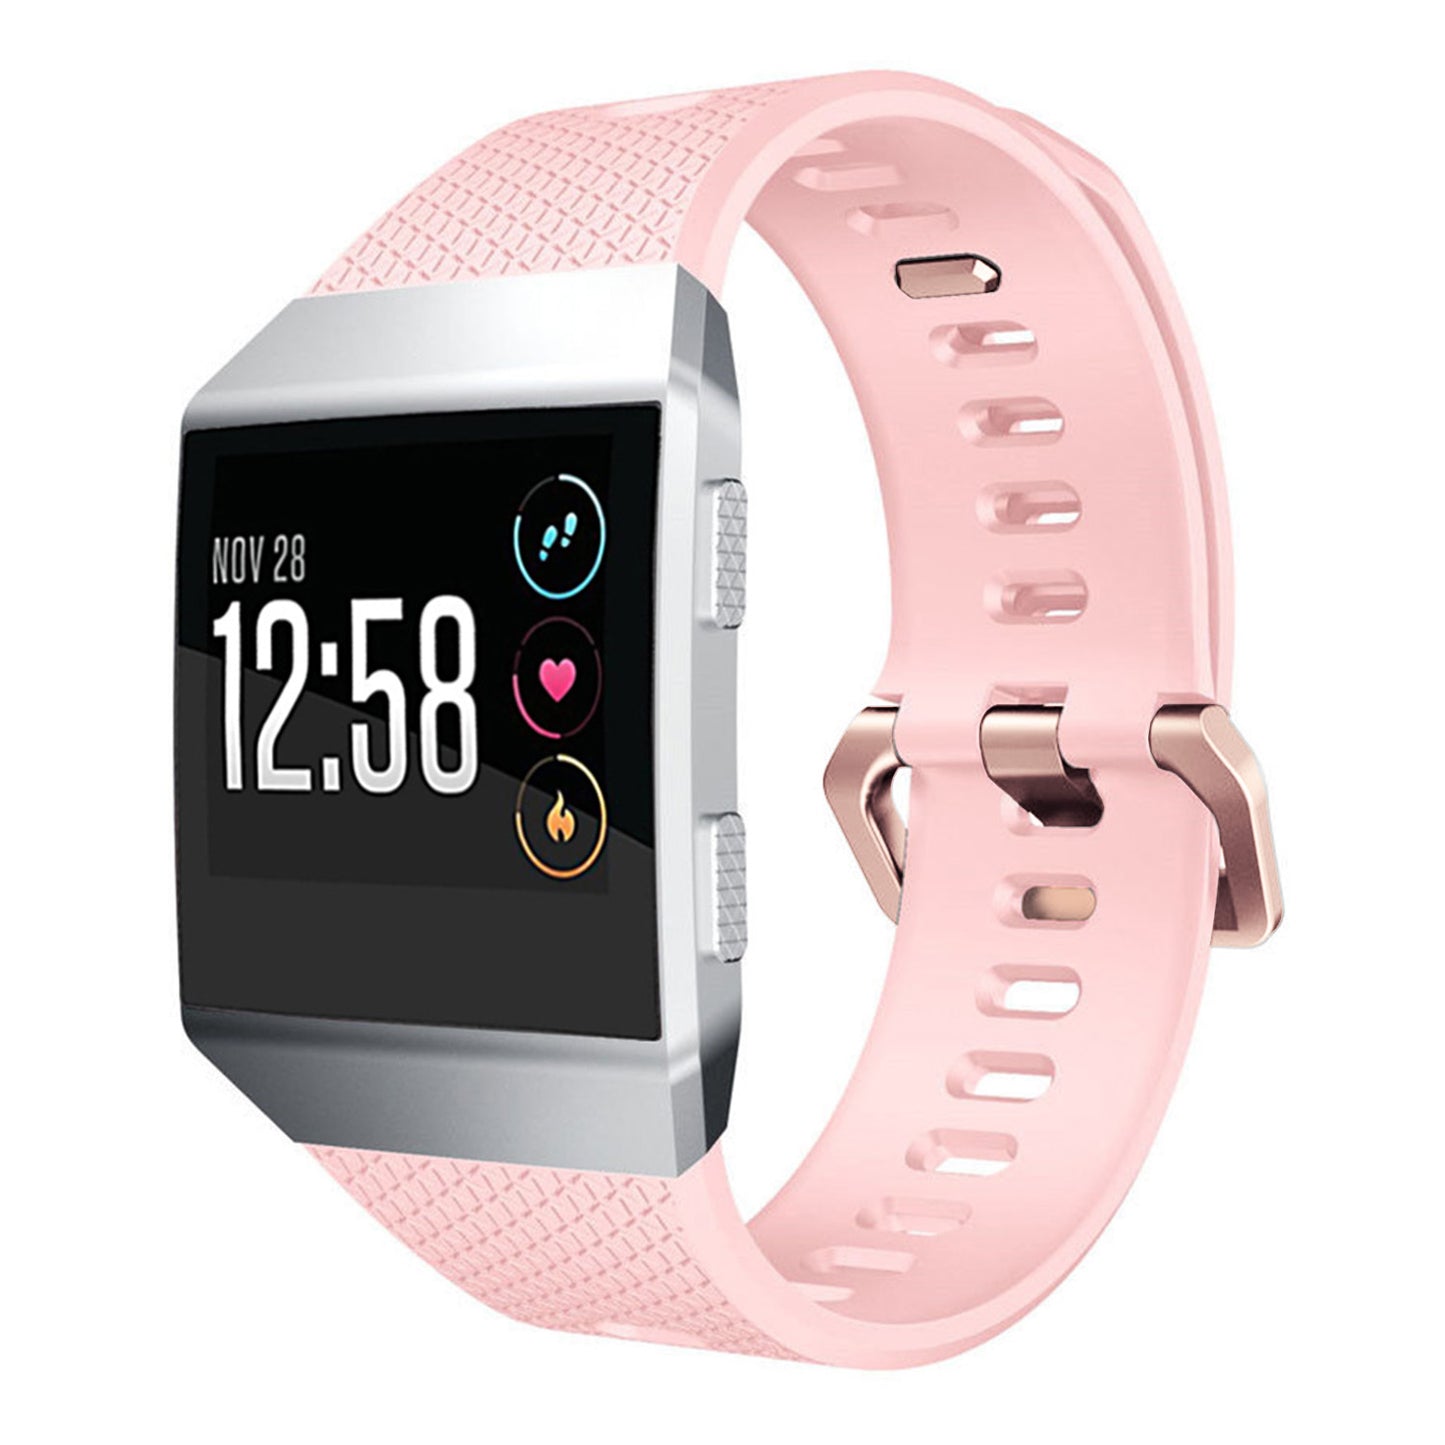 Rubber Strap w/ Protective Case for Fitbit Versa